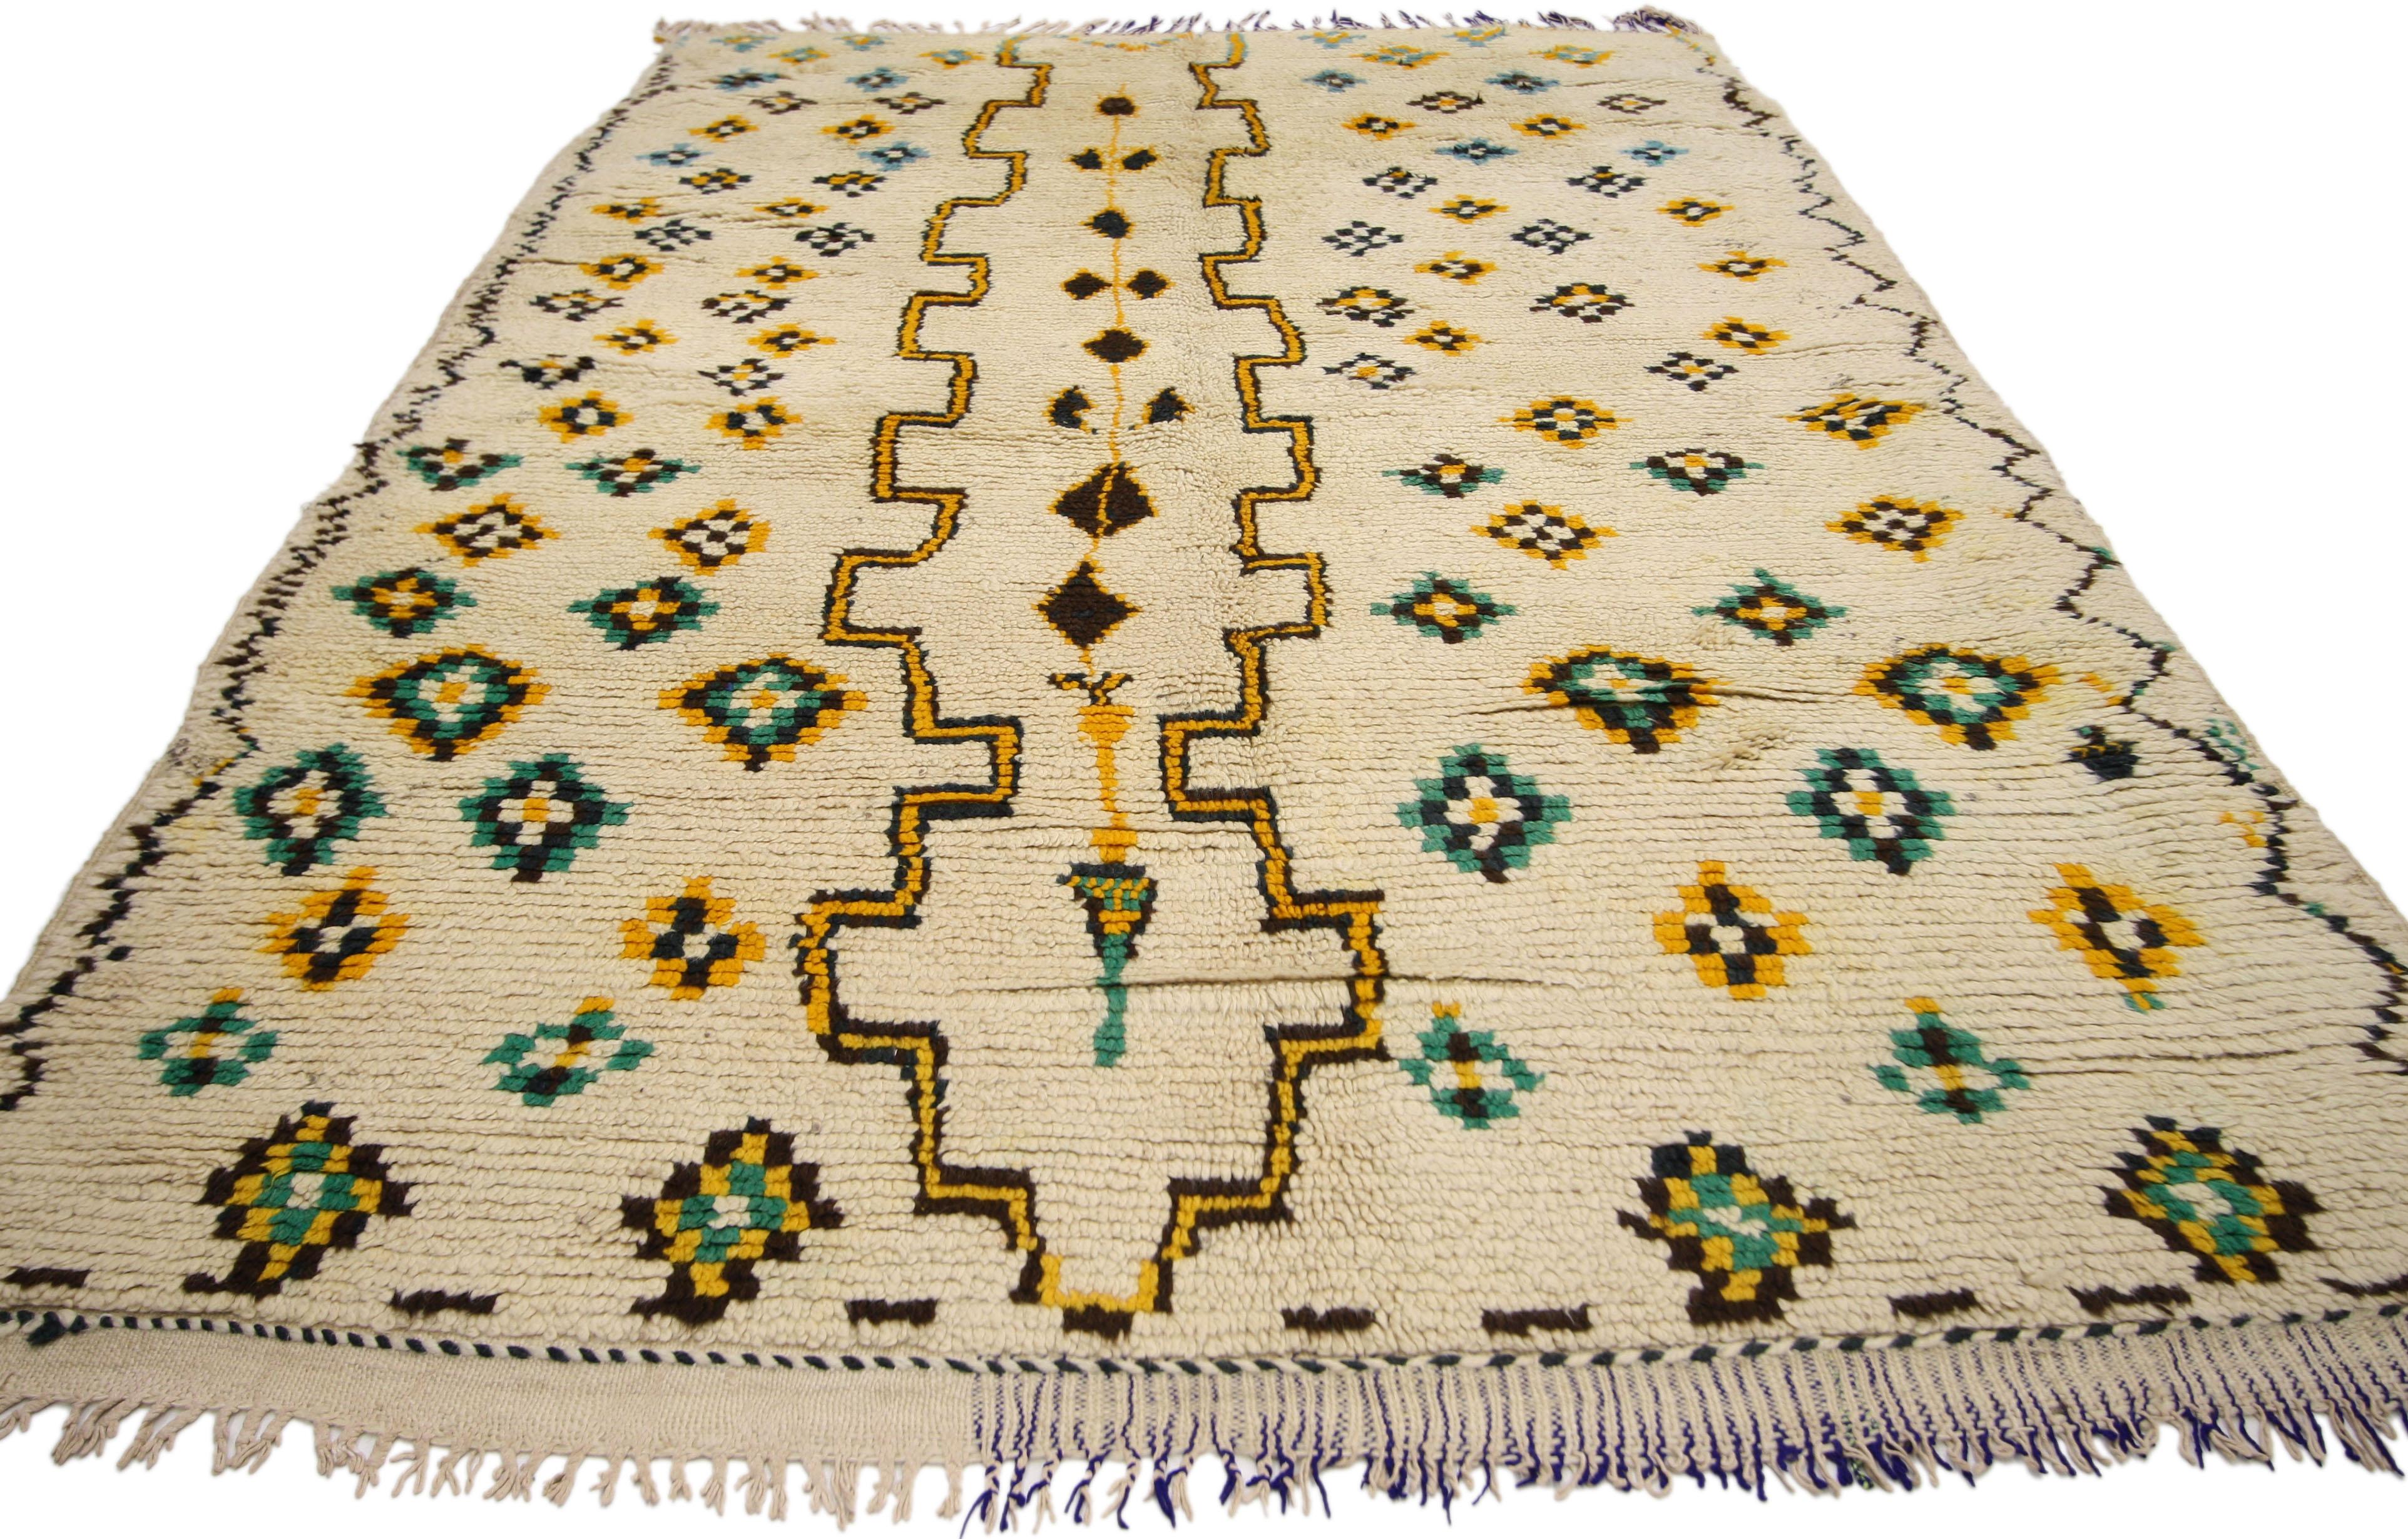 74543, vintage Berber Moroccan Azilal rug with Bohemian Tribal style. This hand knotted wool vintage Berber Moroccan Azilal rug features a Bohemian tribal style. Azilal carpets typically have an ivory to cream background with tribal symbols and